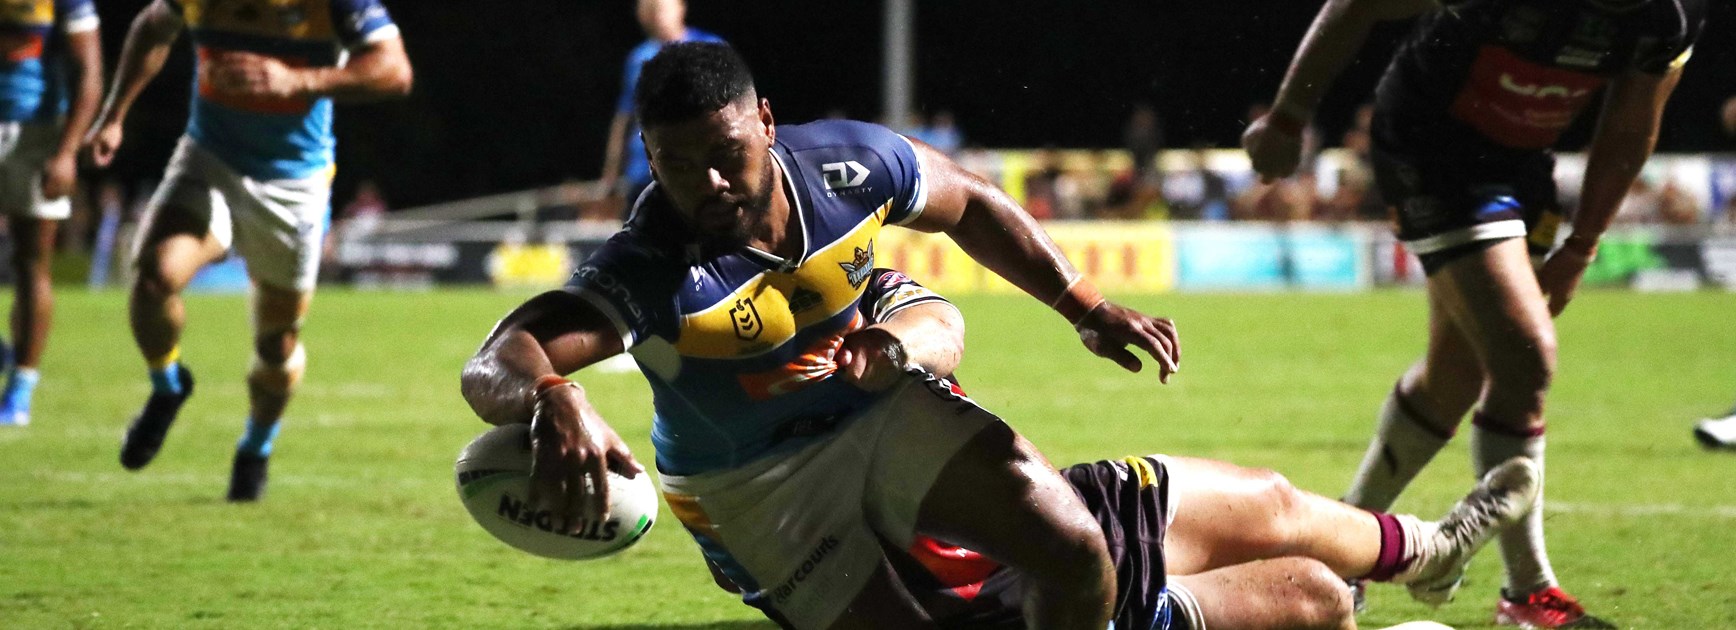 Centres put on strong performance in trial